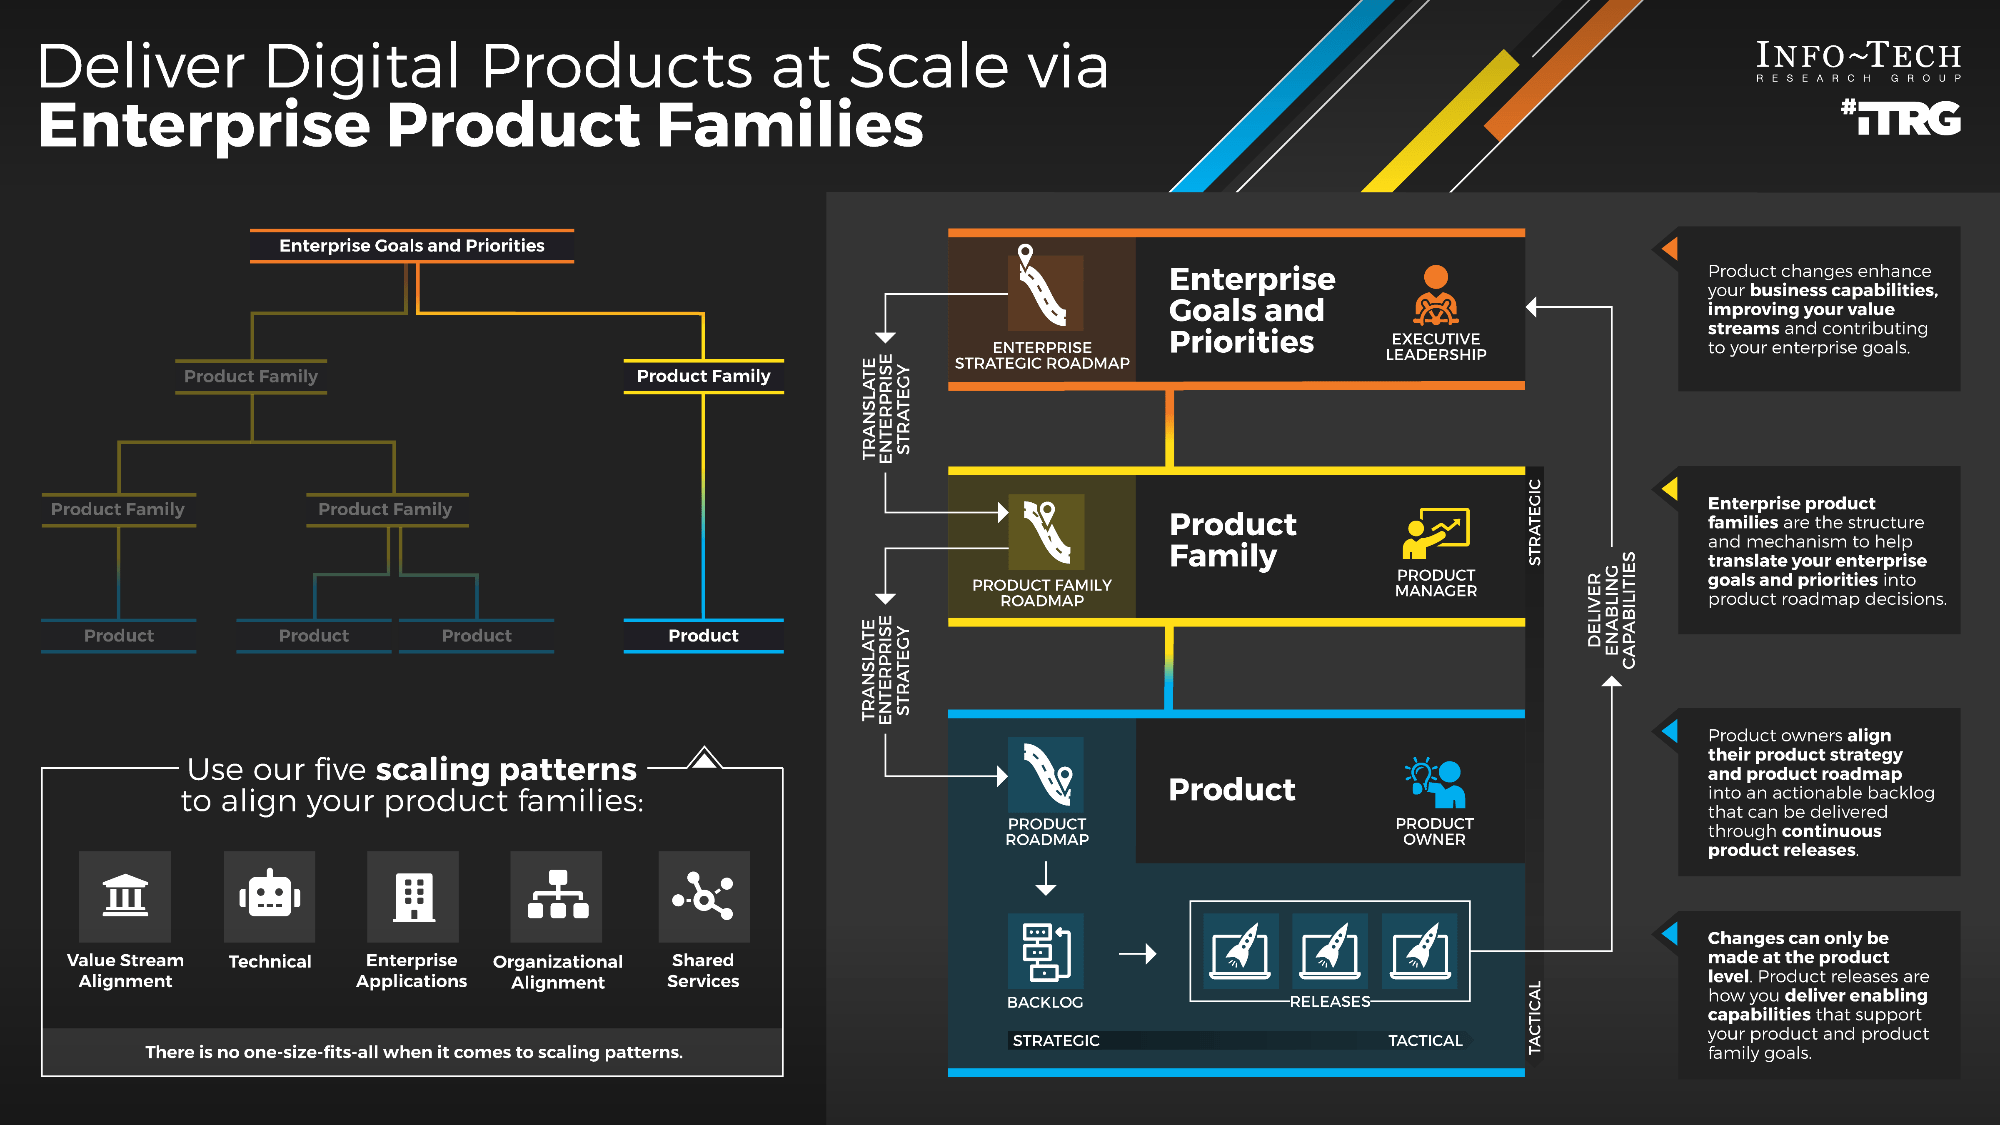 Deliver Digital Products at Scale via Enterprise Product Families